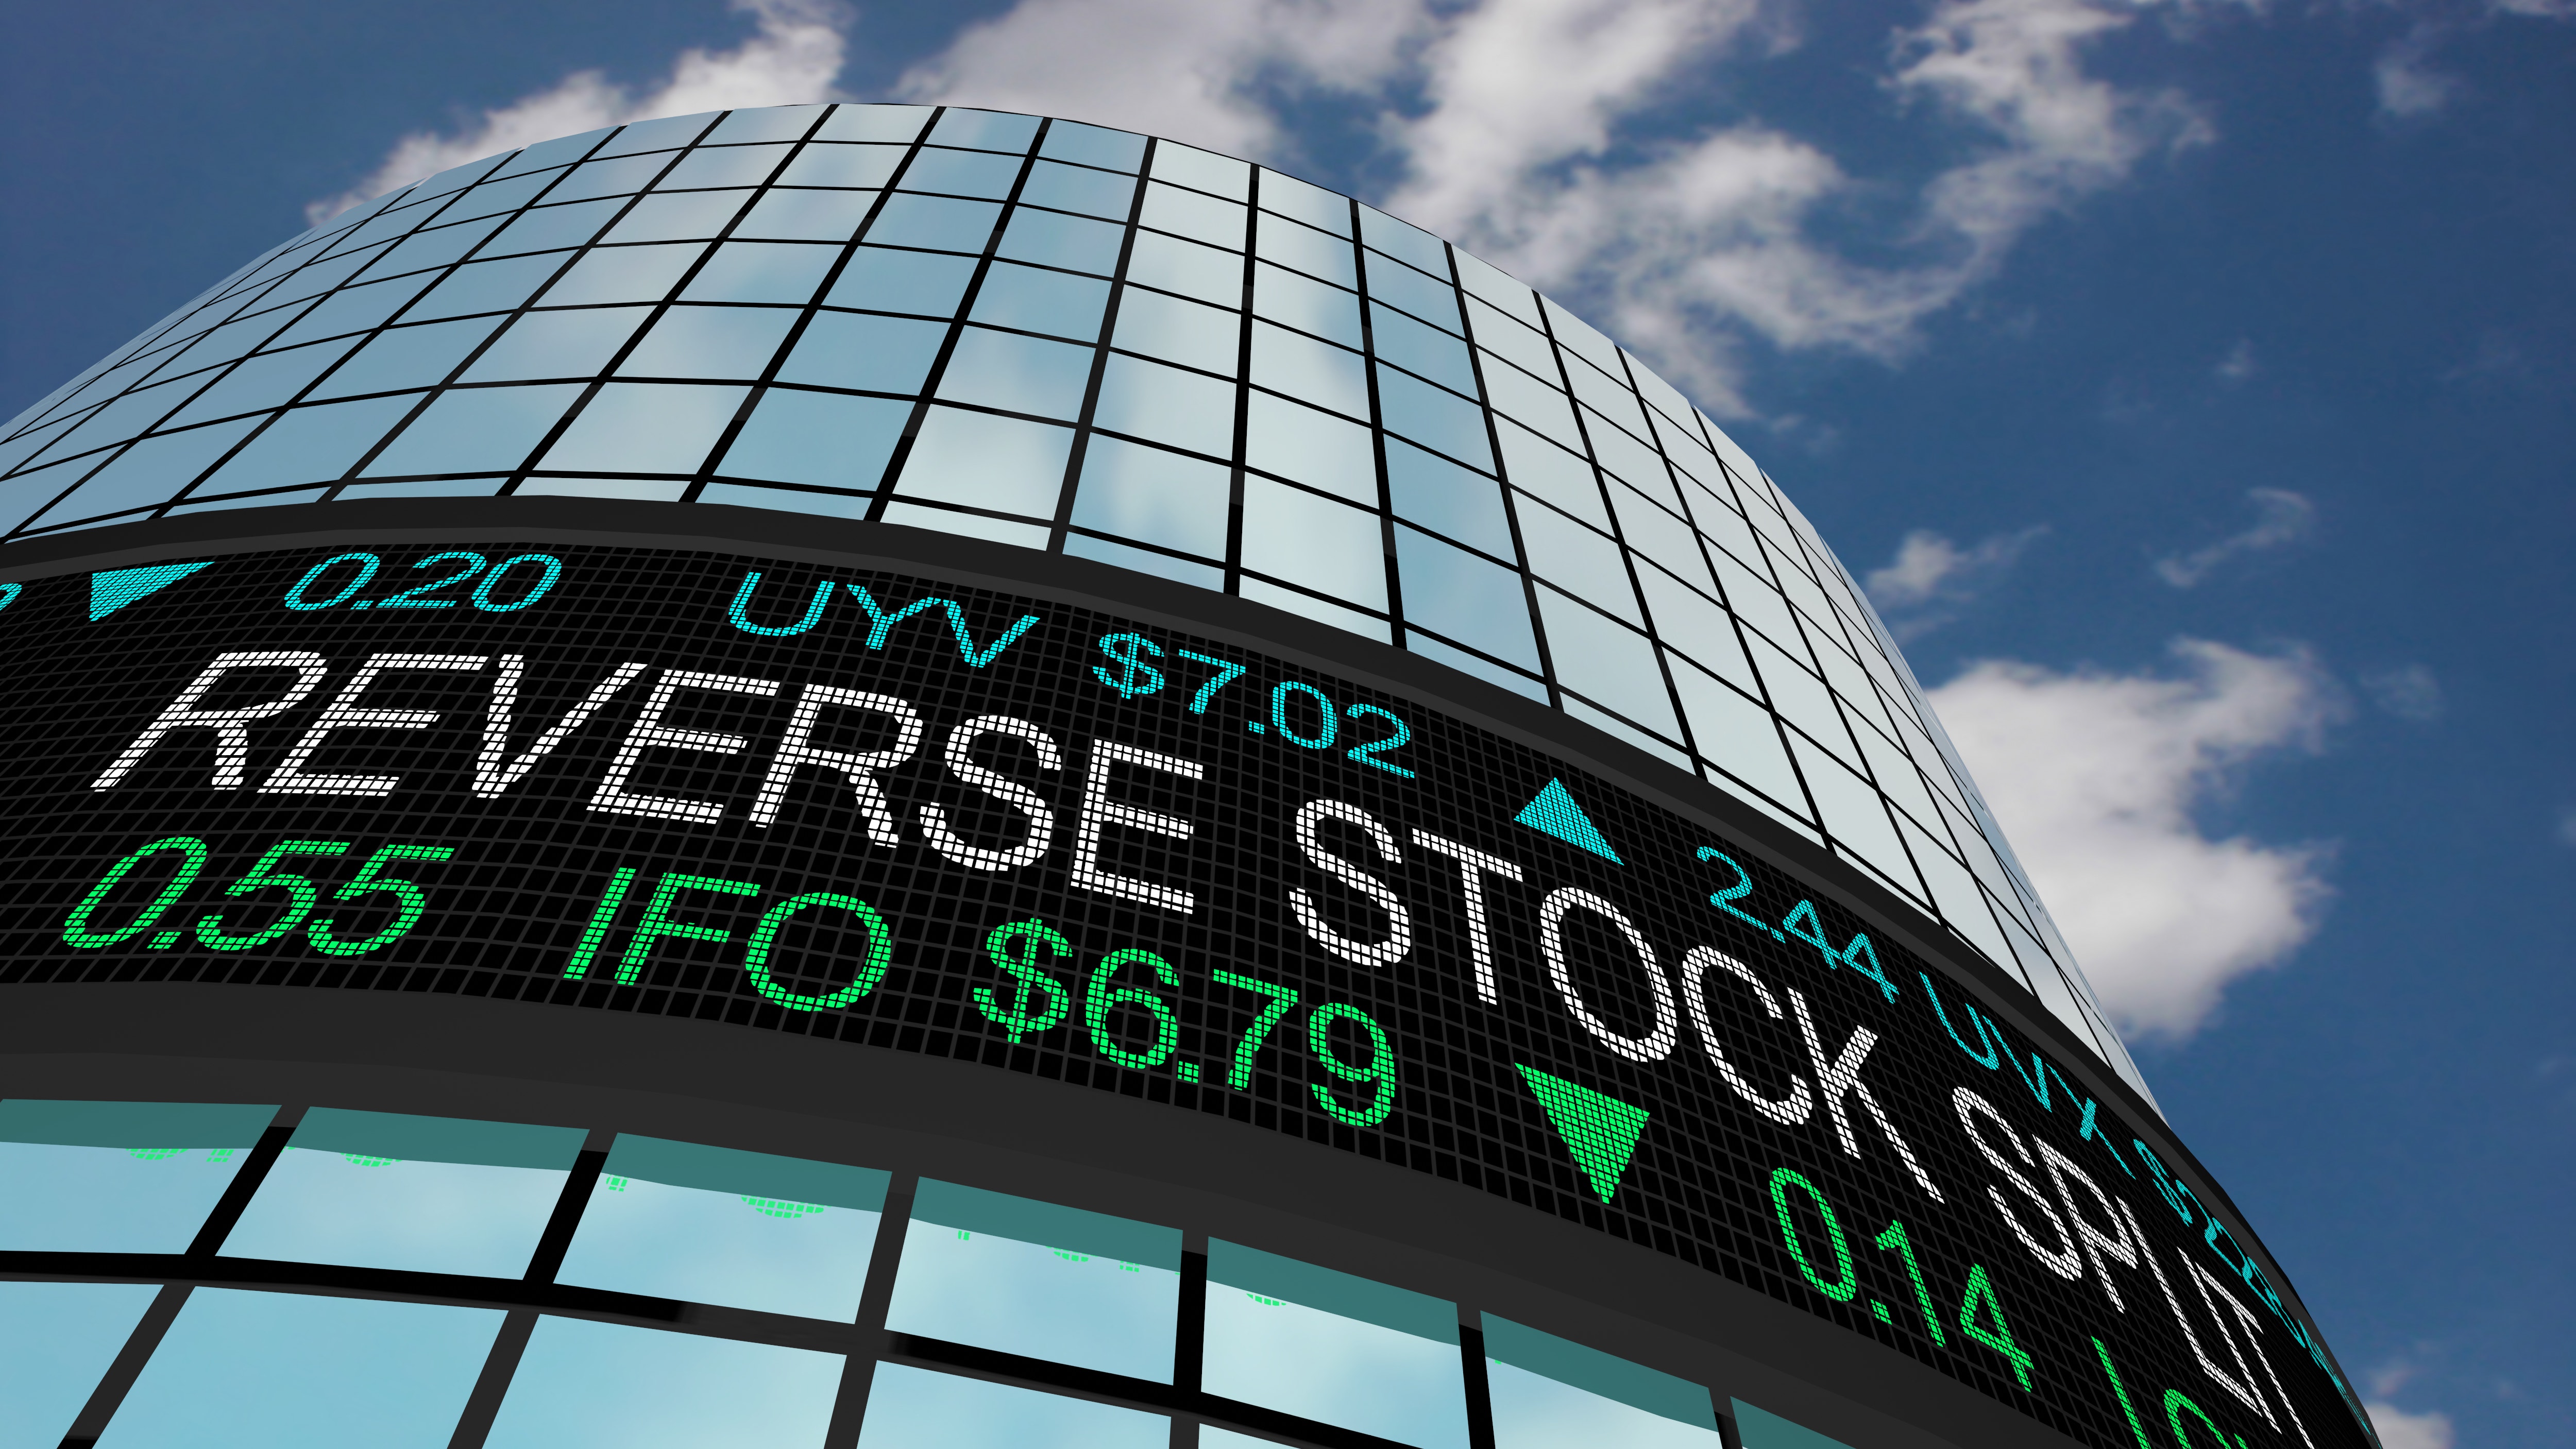 Reverse Stock Split: What It Is, How It Works, and Examples